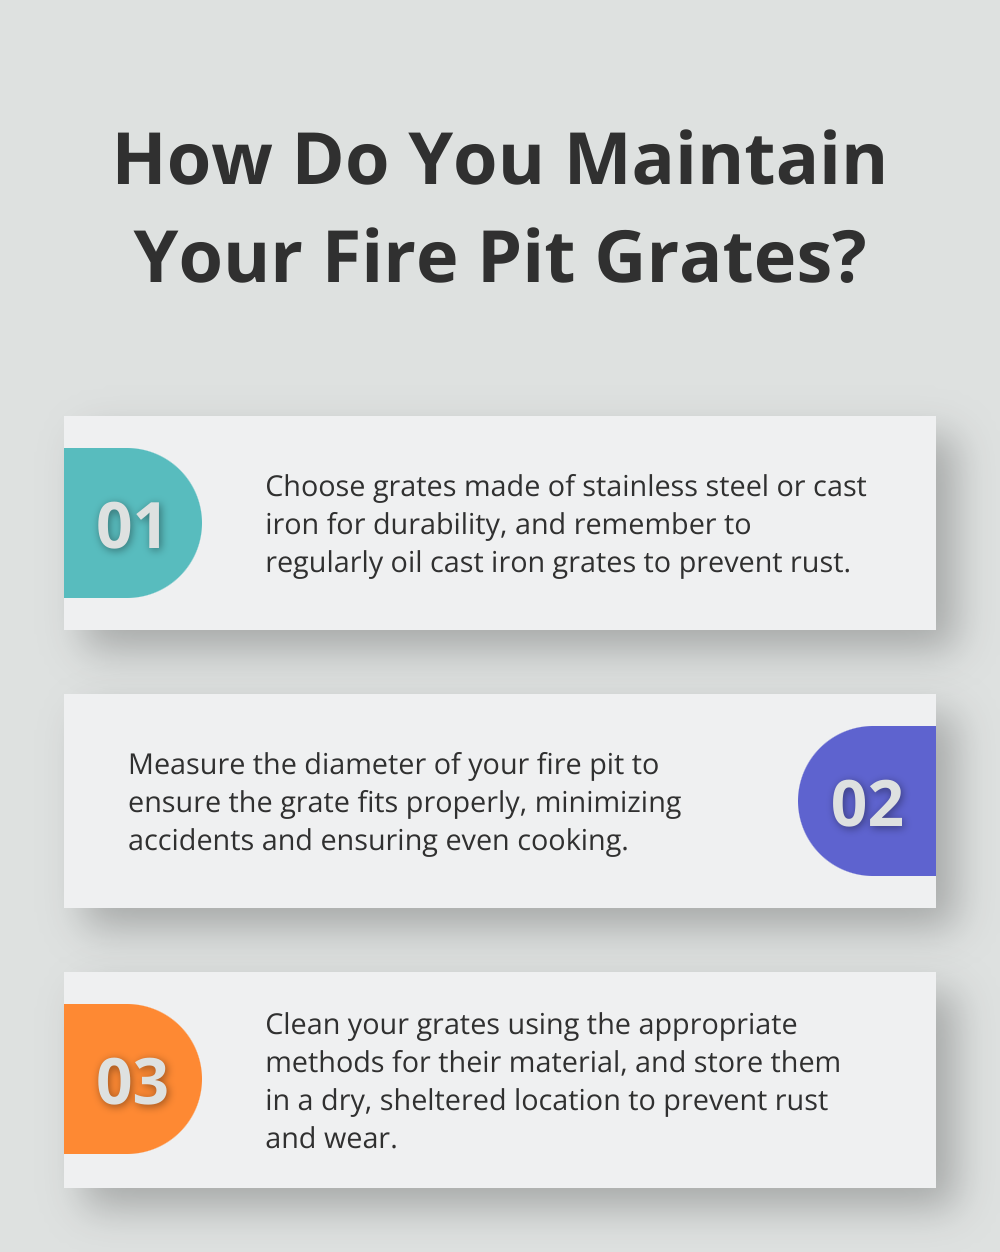 Fact - How Do You Maintain Your Fire Pit Grates?